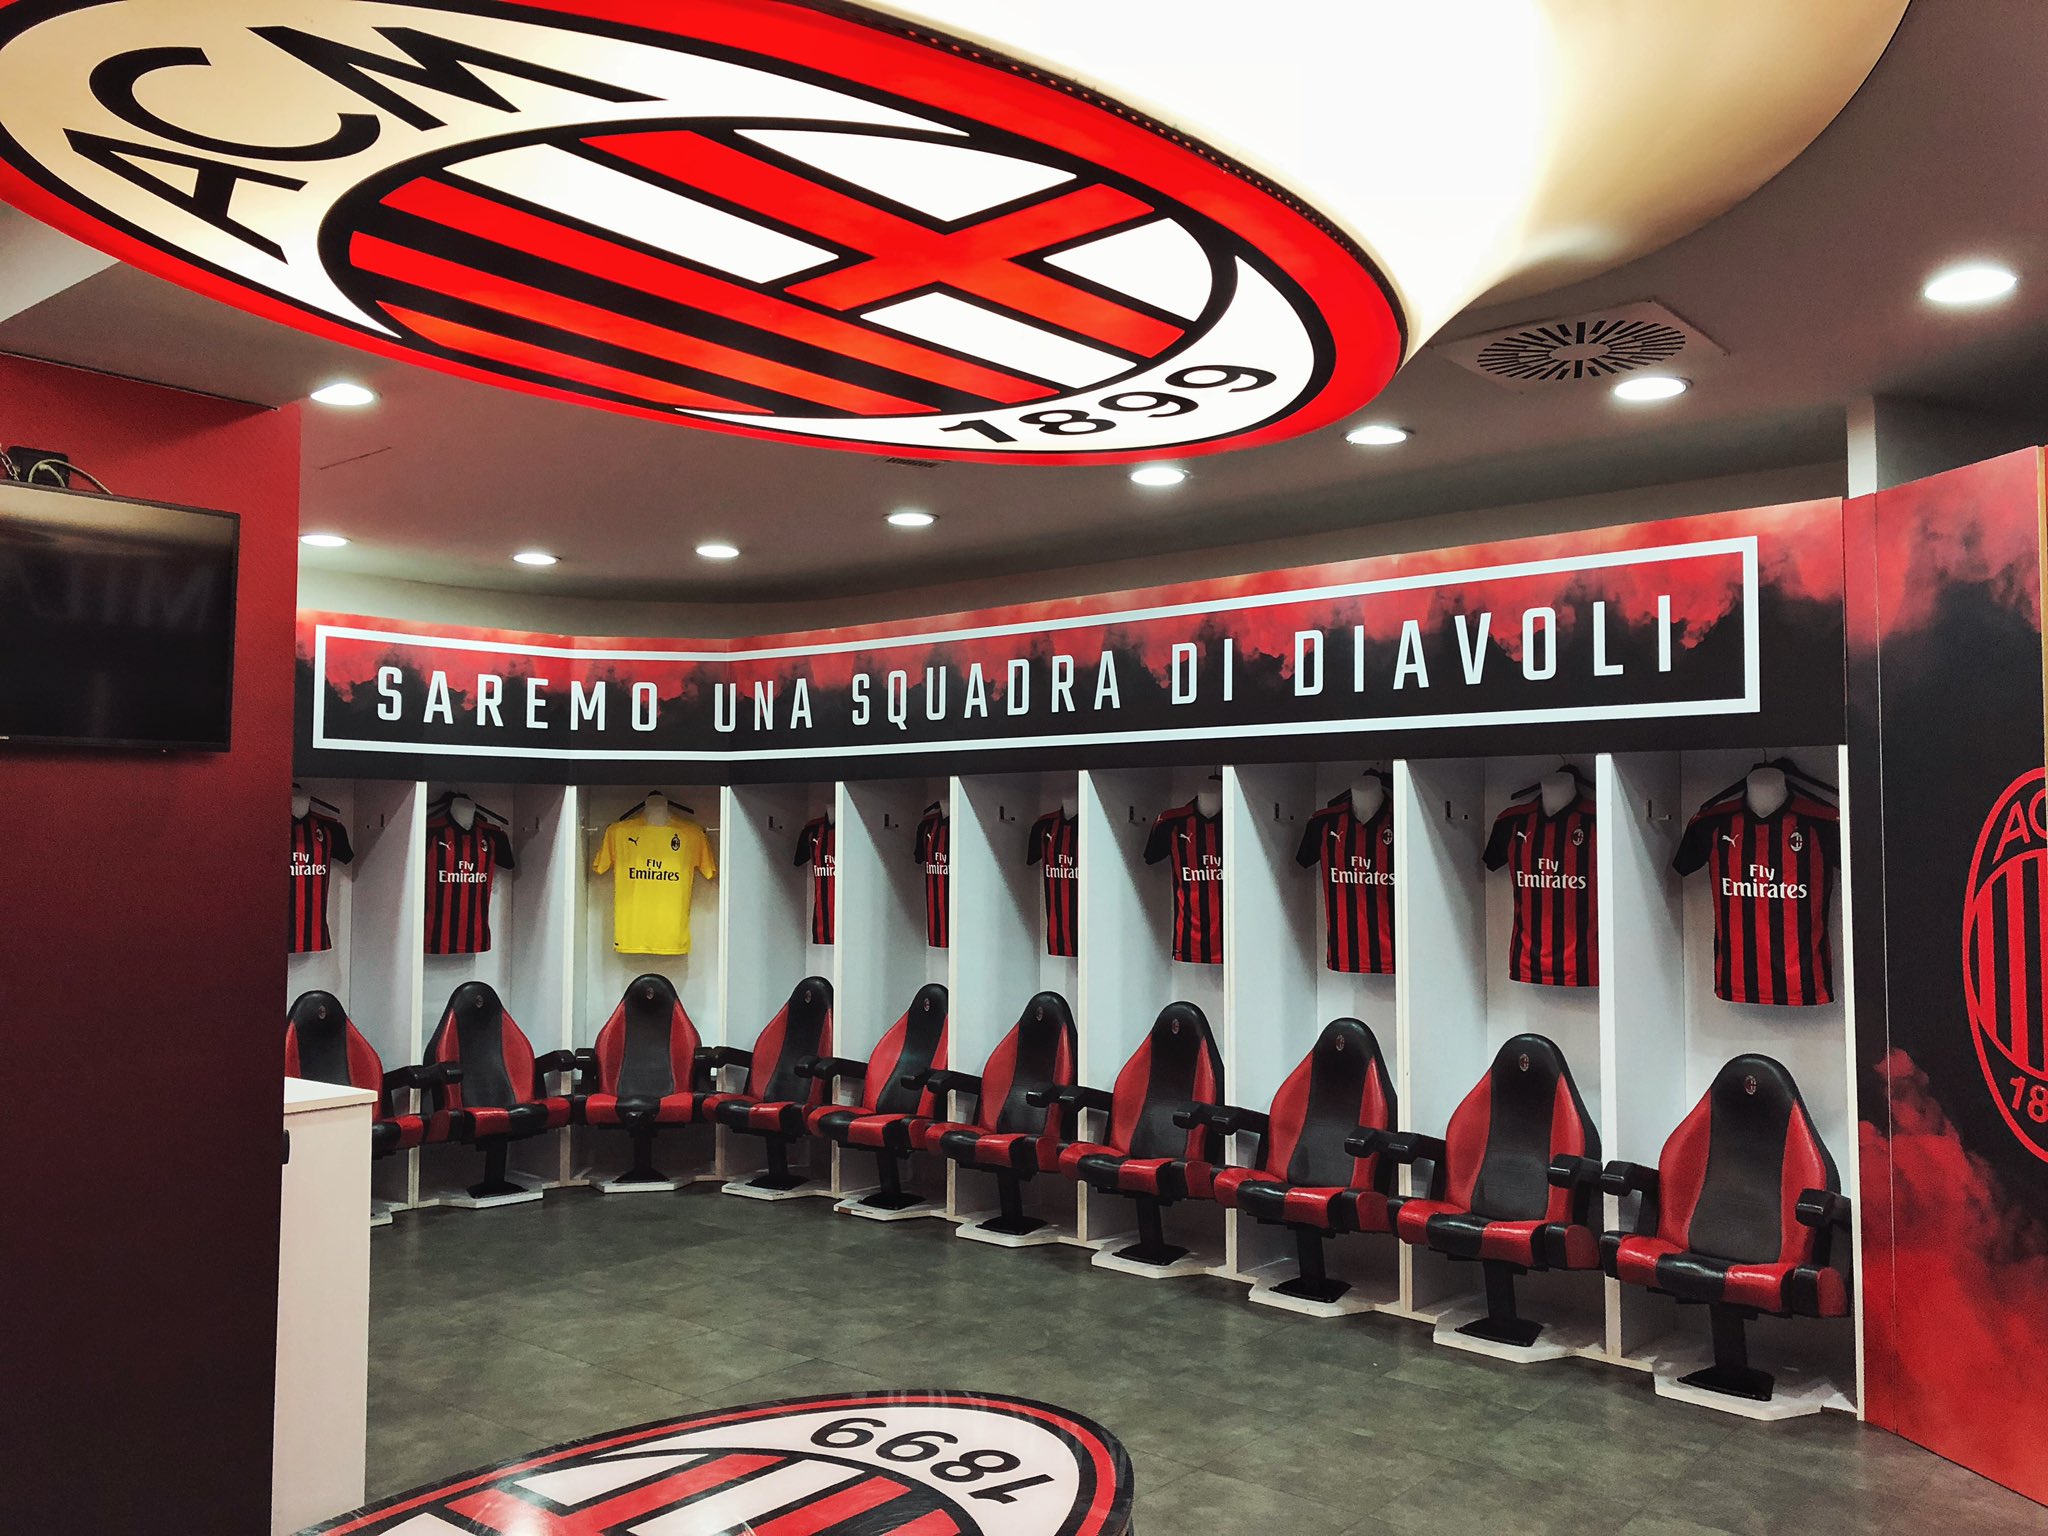 flise Fremragende Besættelse Joe Crann on Twitter: "AC Milan's changing room at the San Siro is  substantially better than Inter's... Their slogan is pretty dope too:  “We're going to be a team of devils.” ///